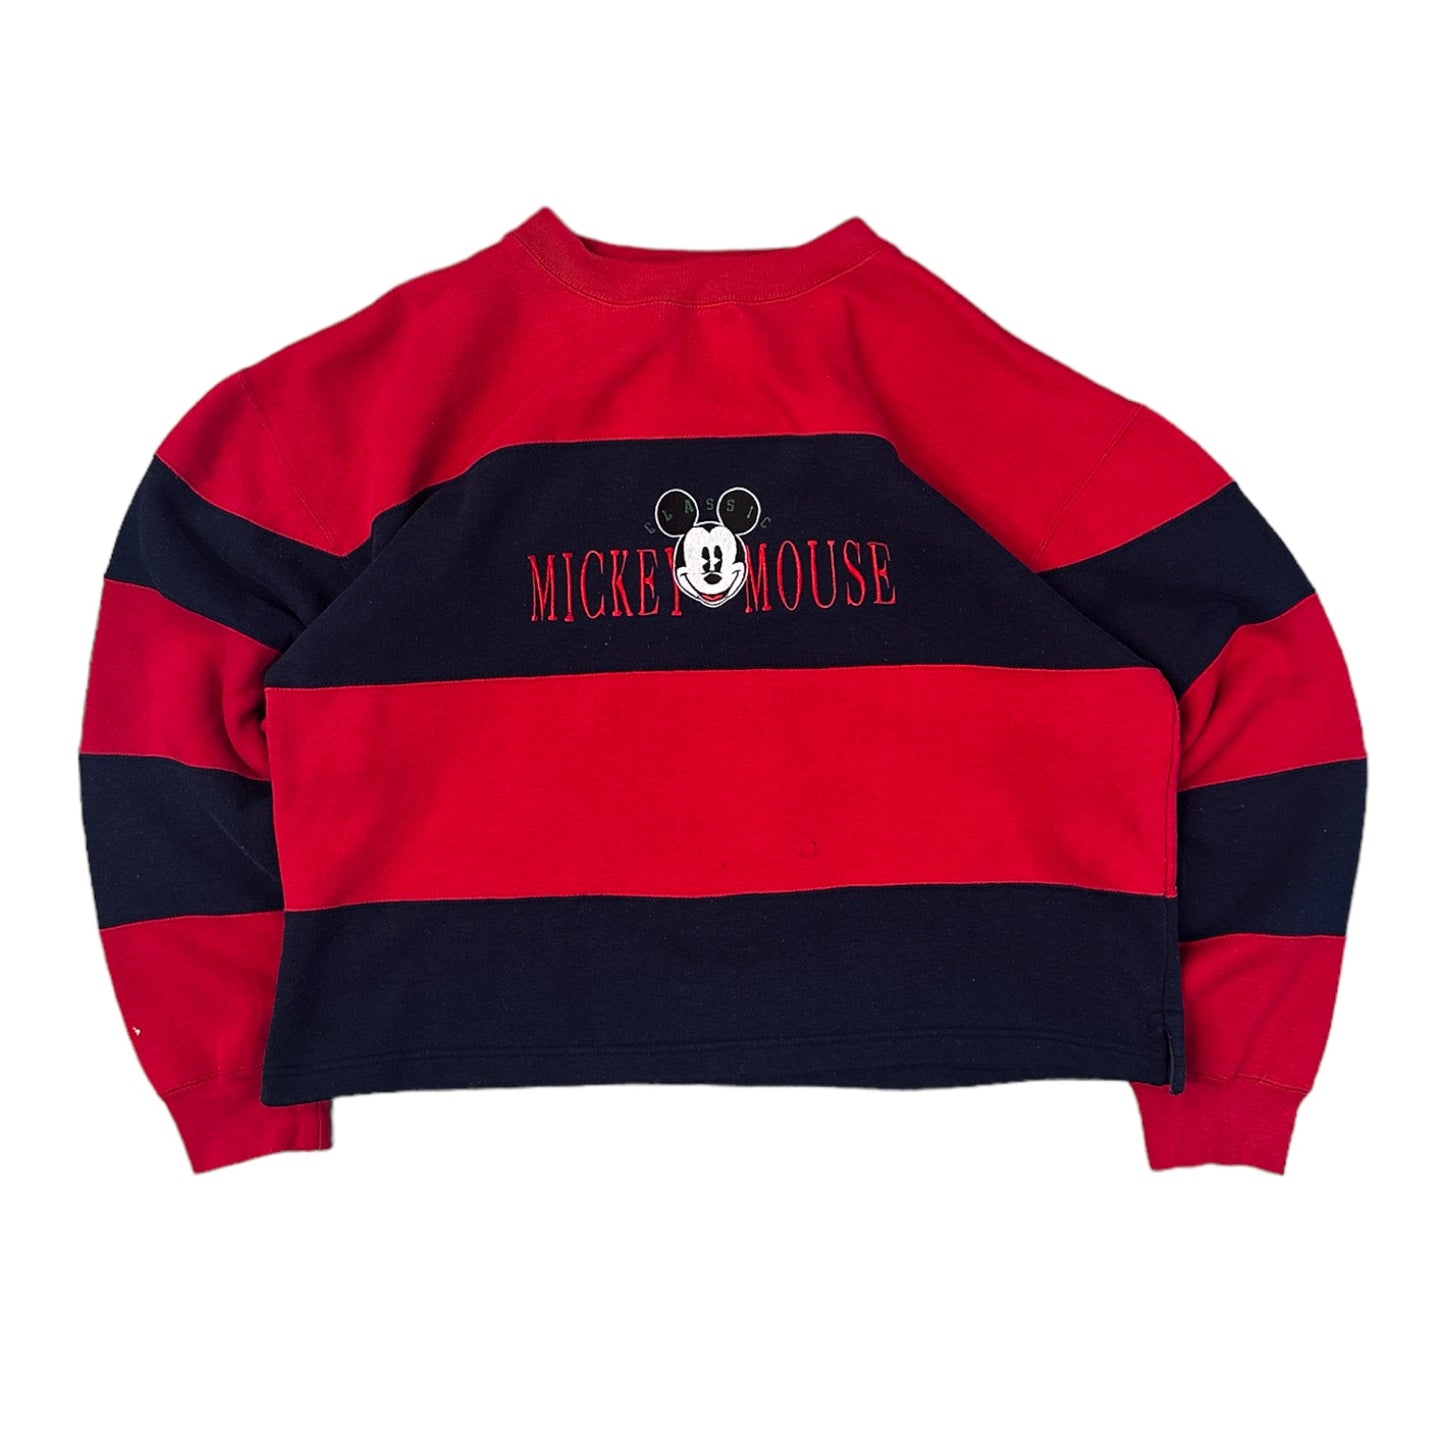 Vintage Mickey Mouse Navy & Red Striped Sweatshirt